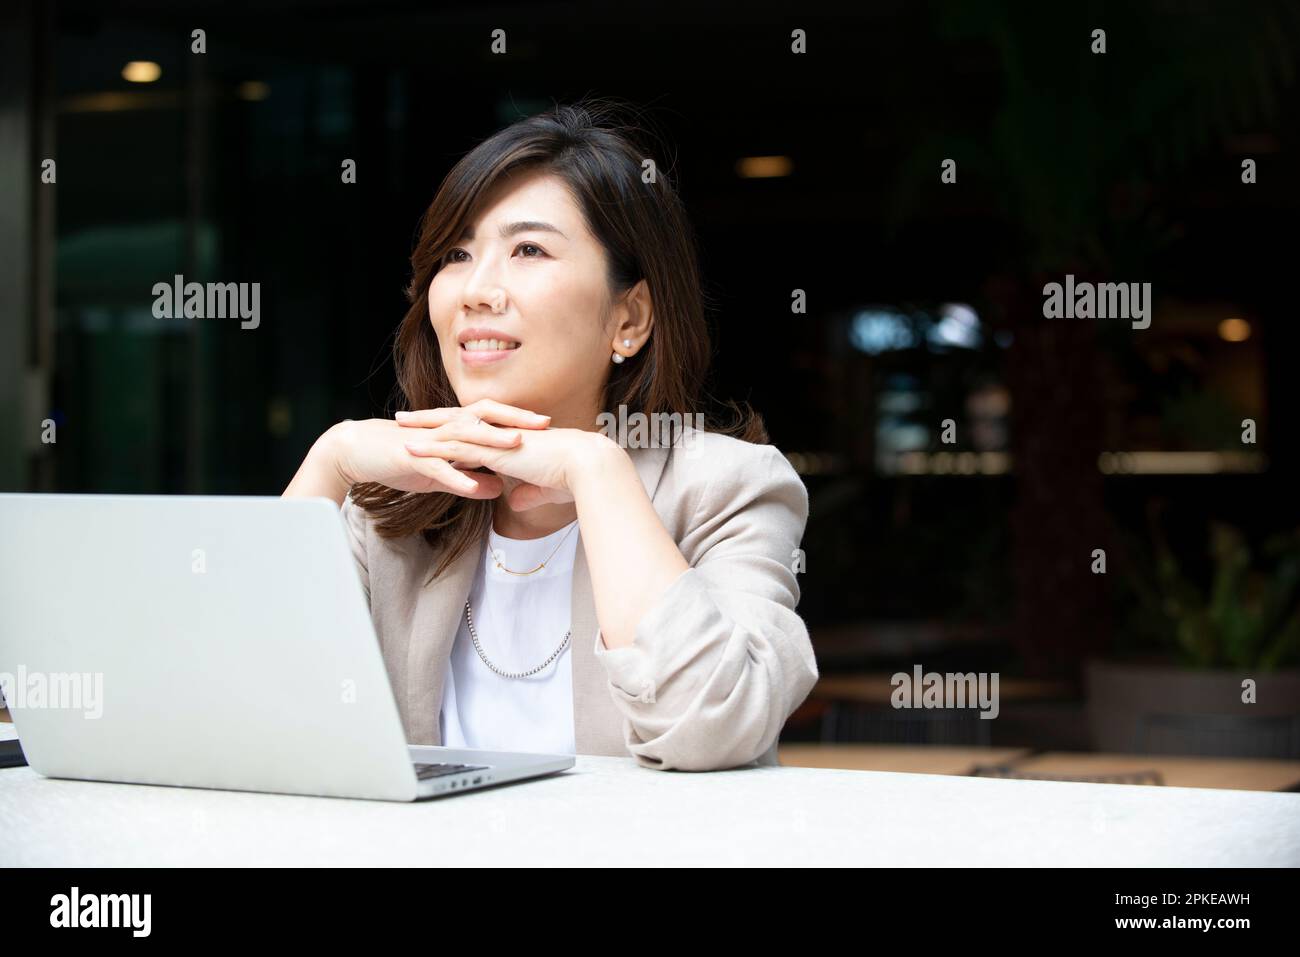 Woman thinking with computer open outside Stock Photo